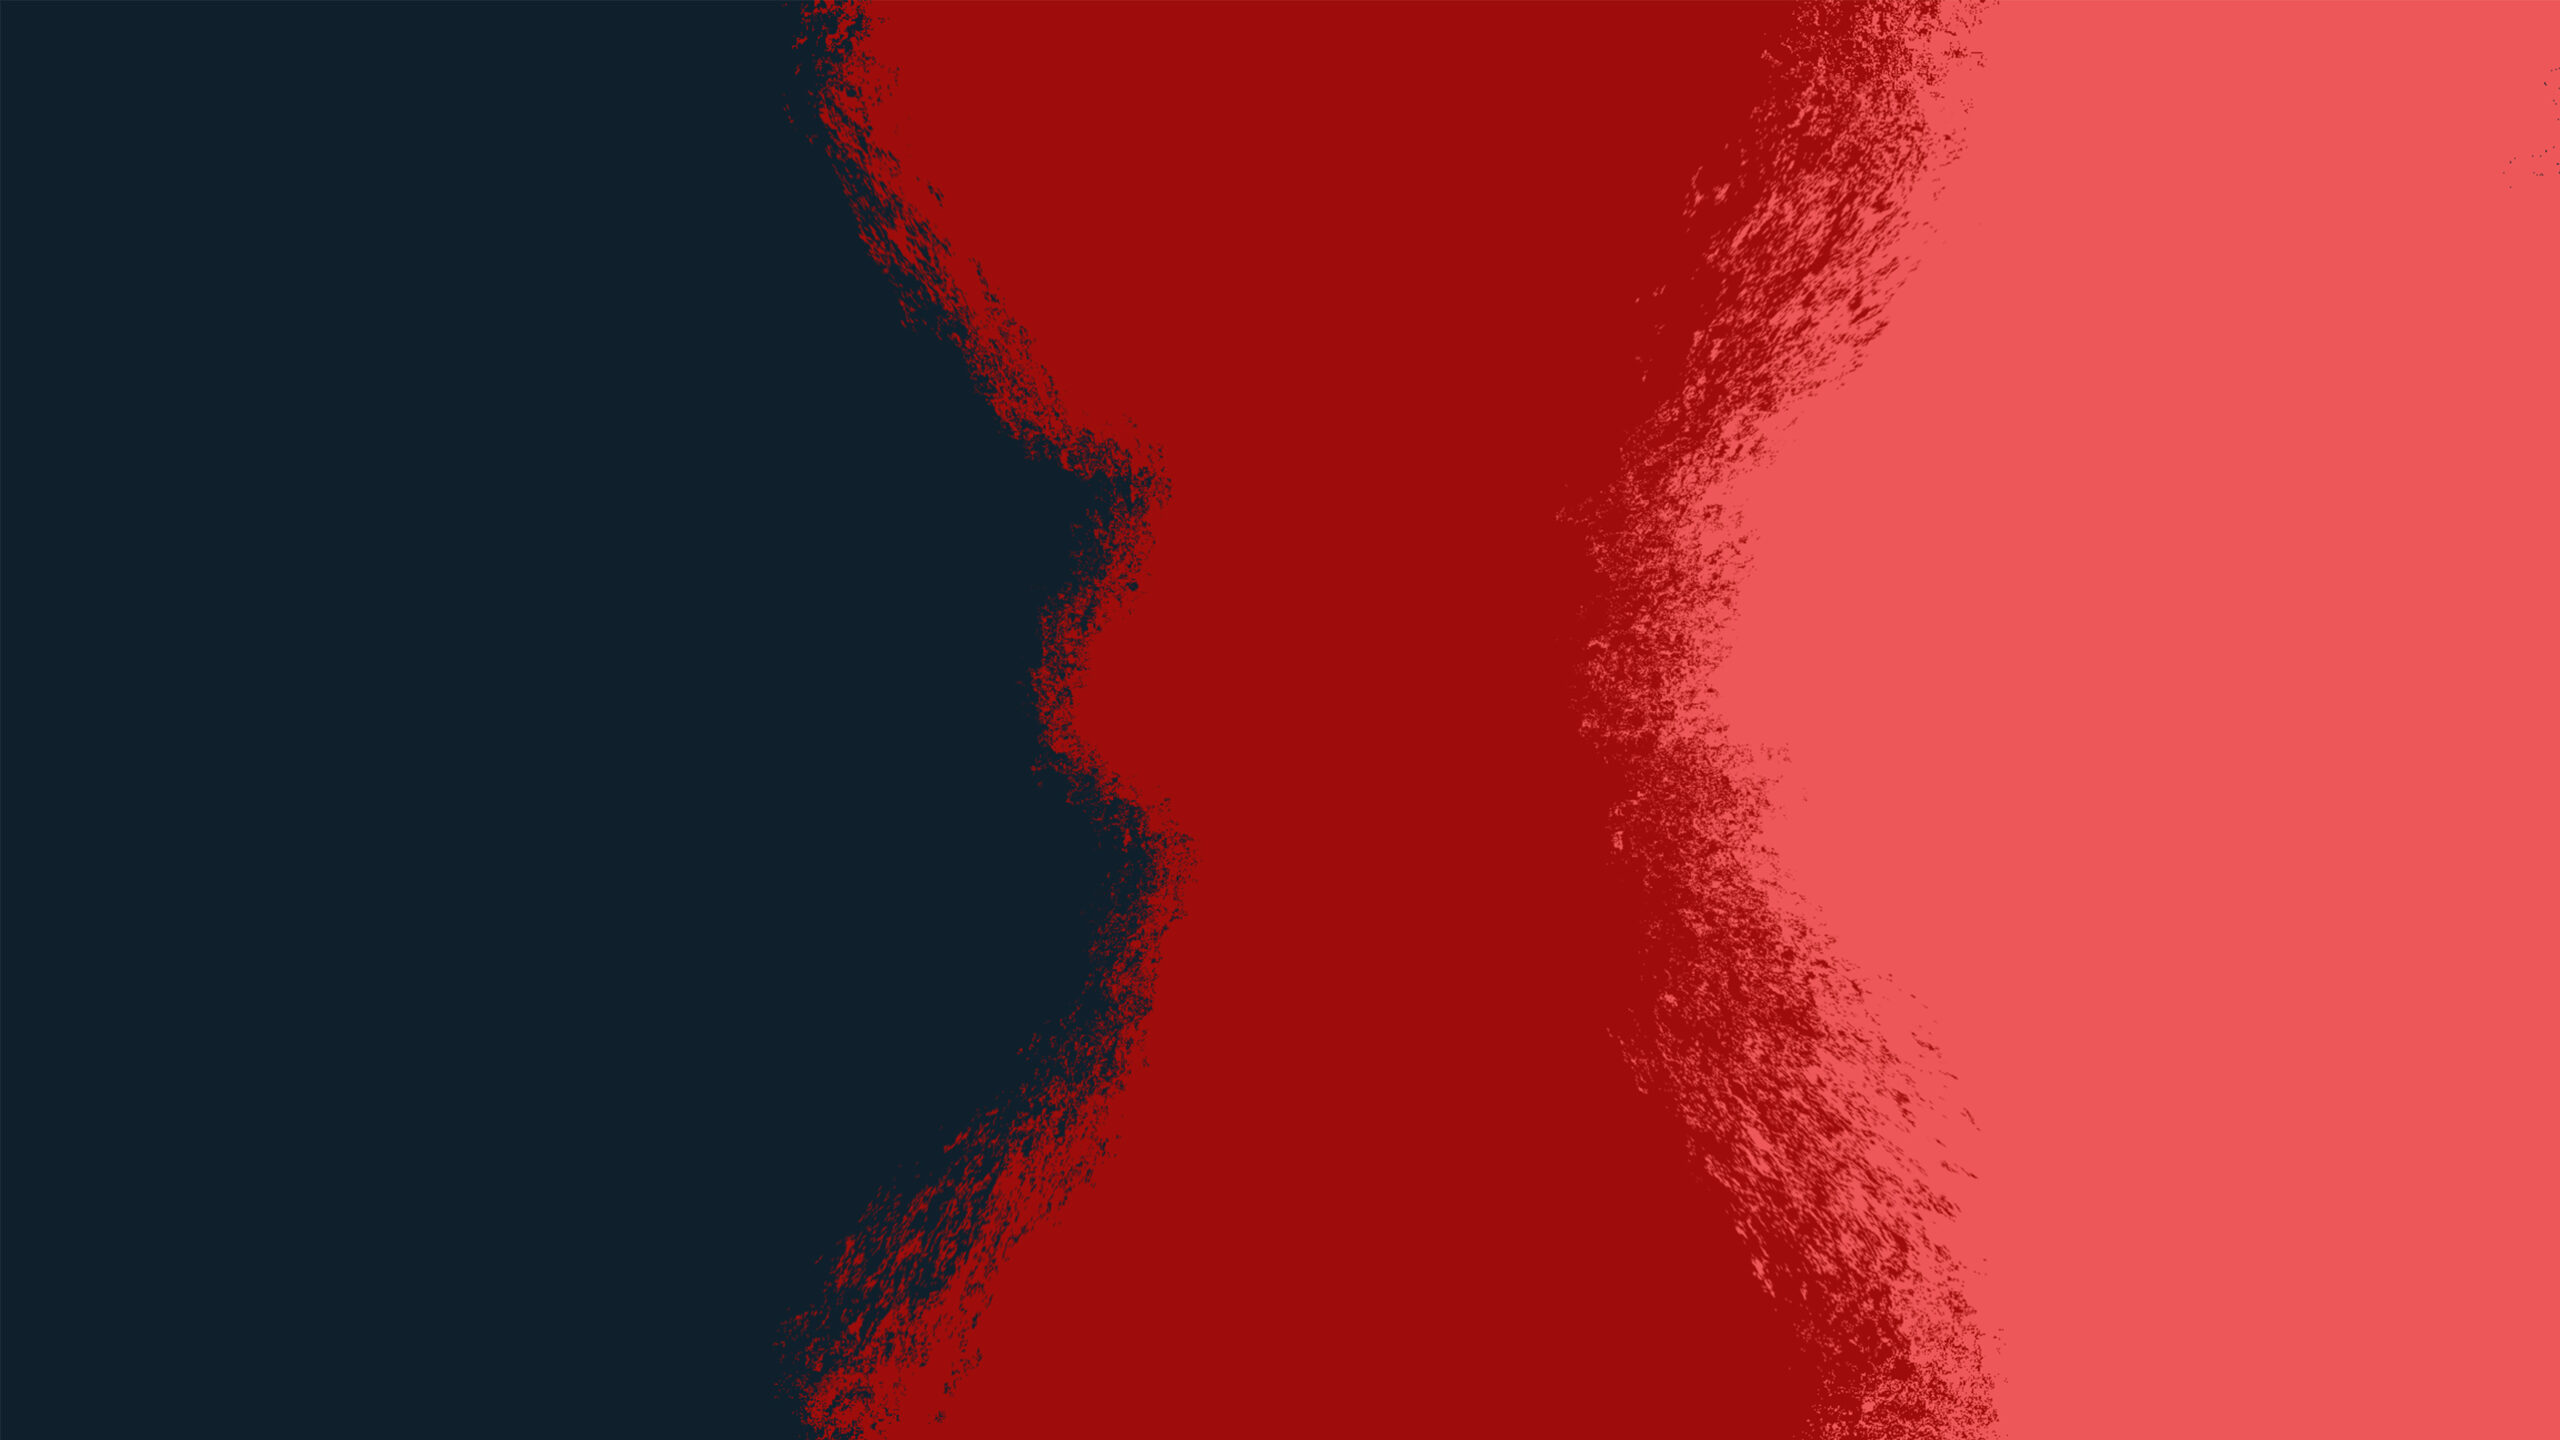 Navy blue, red and pink blocks of colour